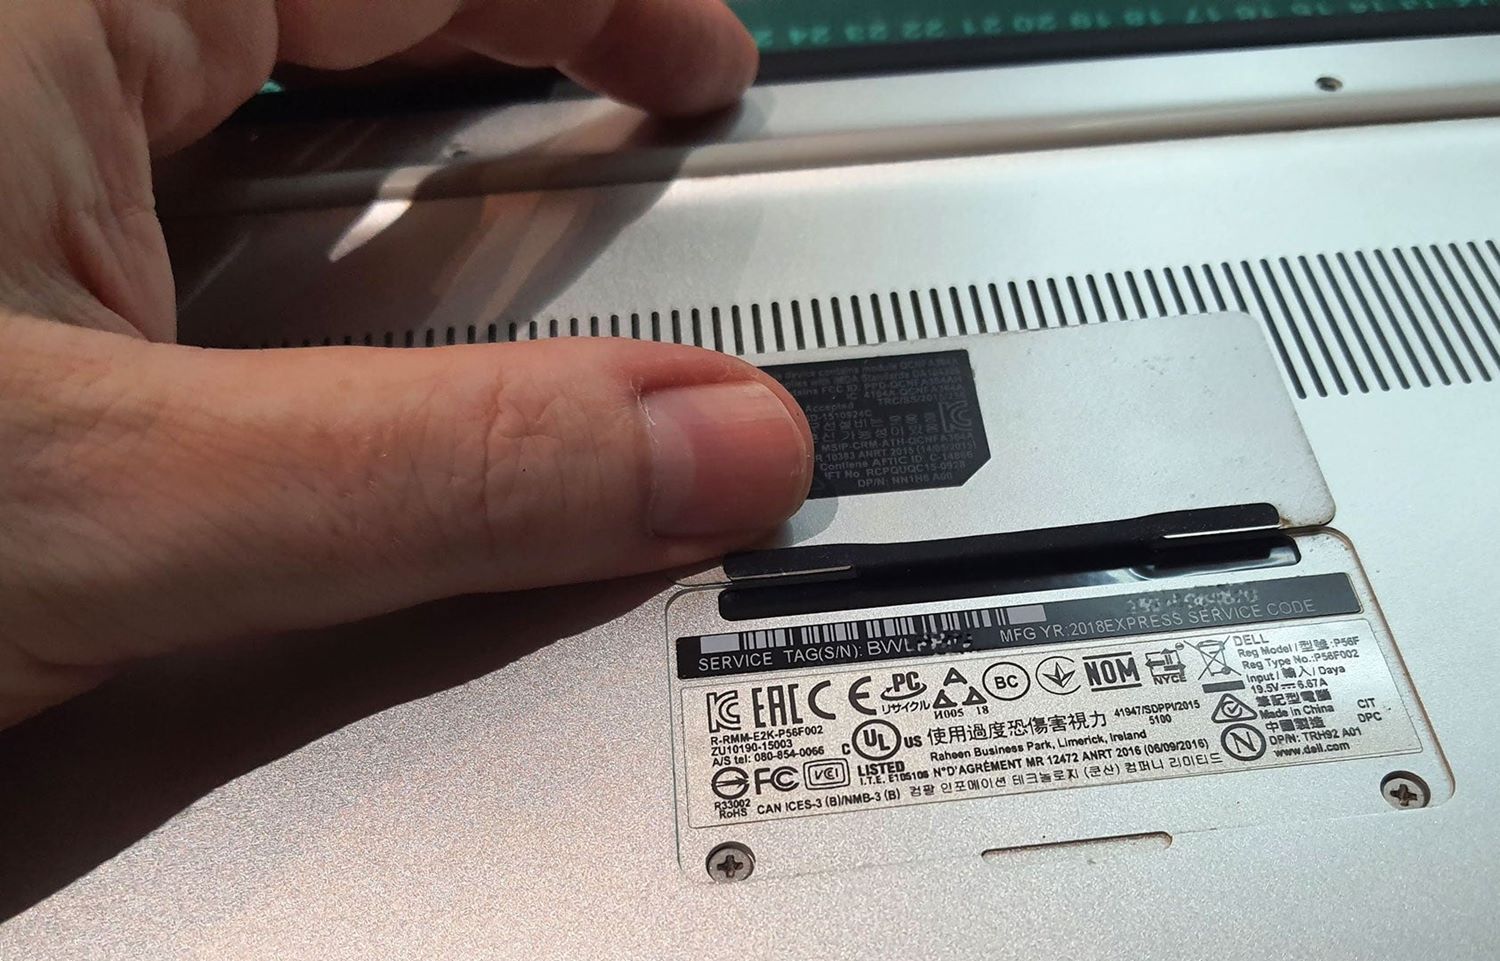 How To Get The Serial Number Of A Laptop